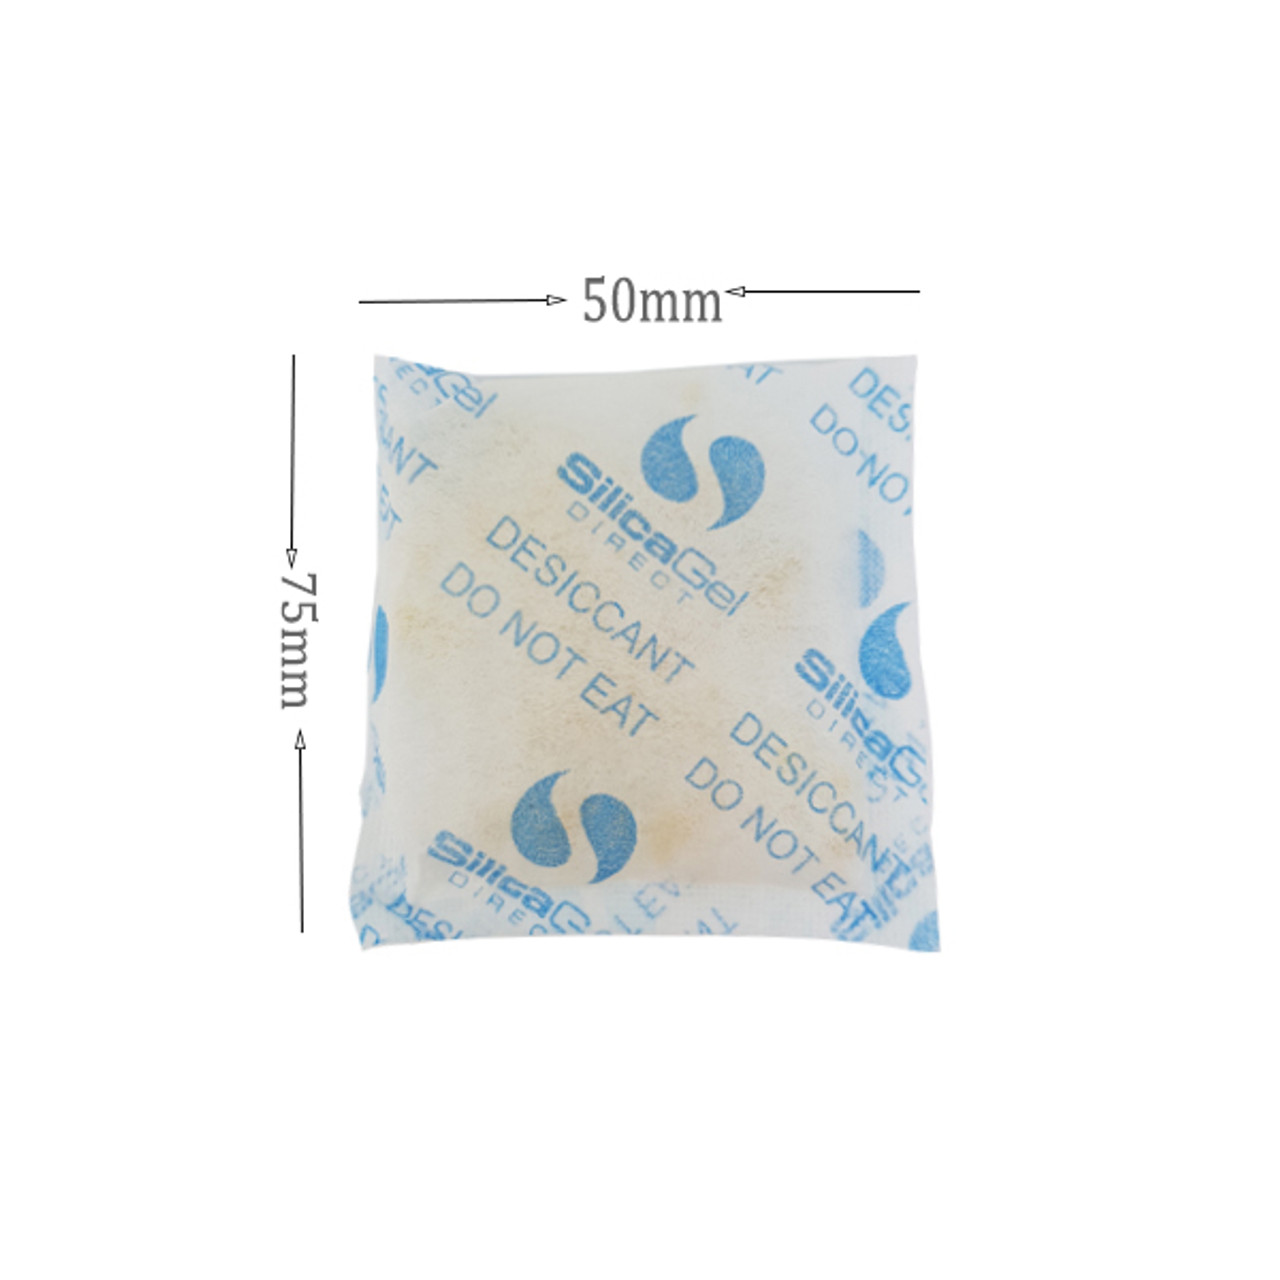 10gm Silica Gel Moisture Absorber Desiccant Indicating Orange/White Packets 